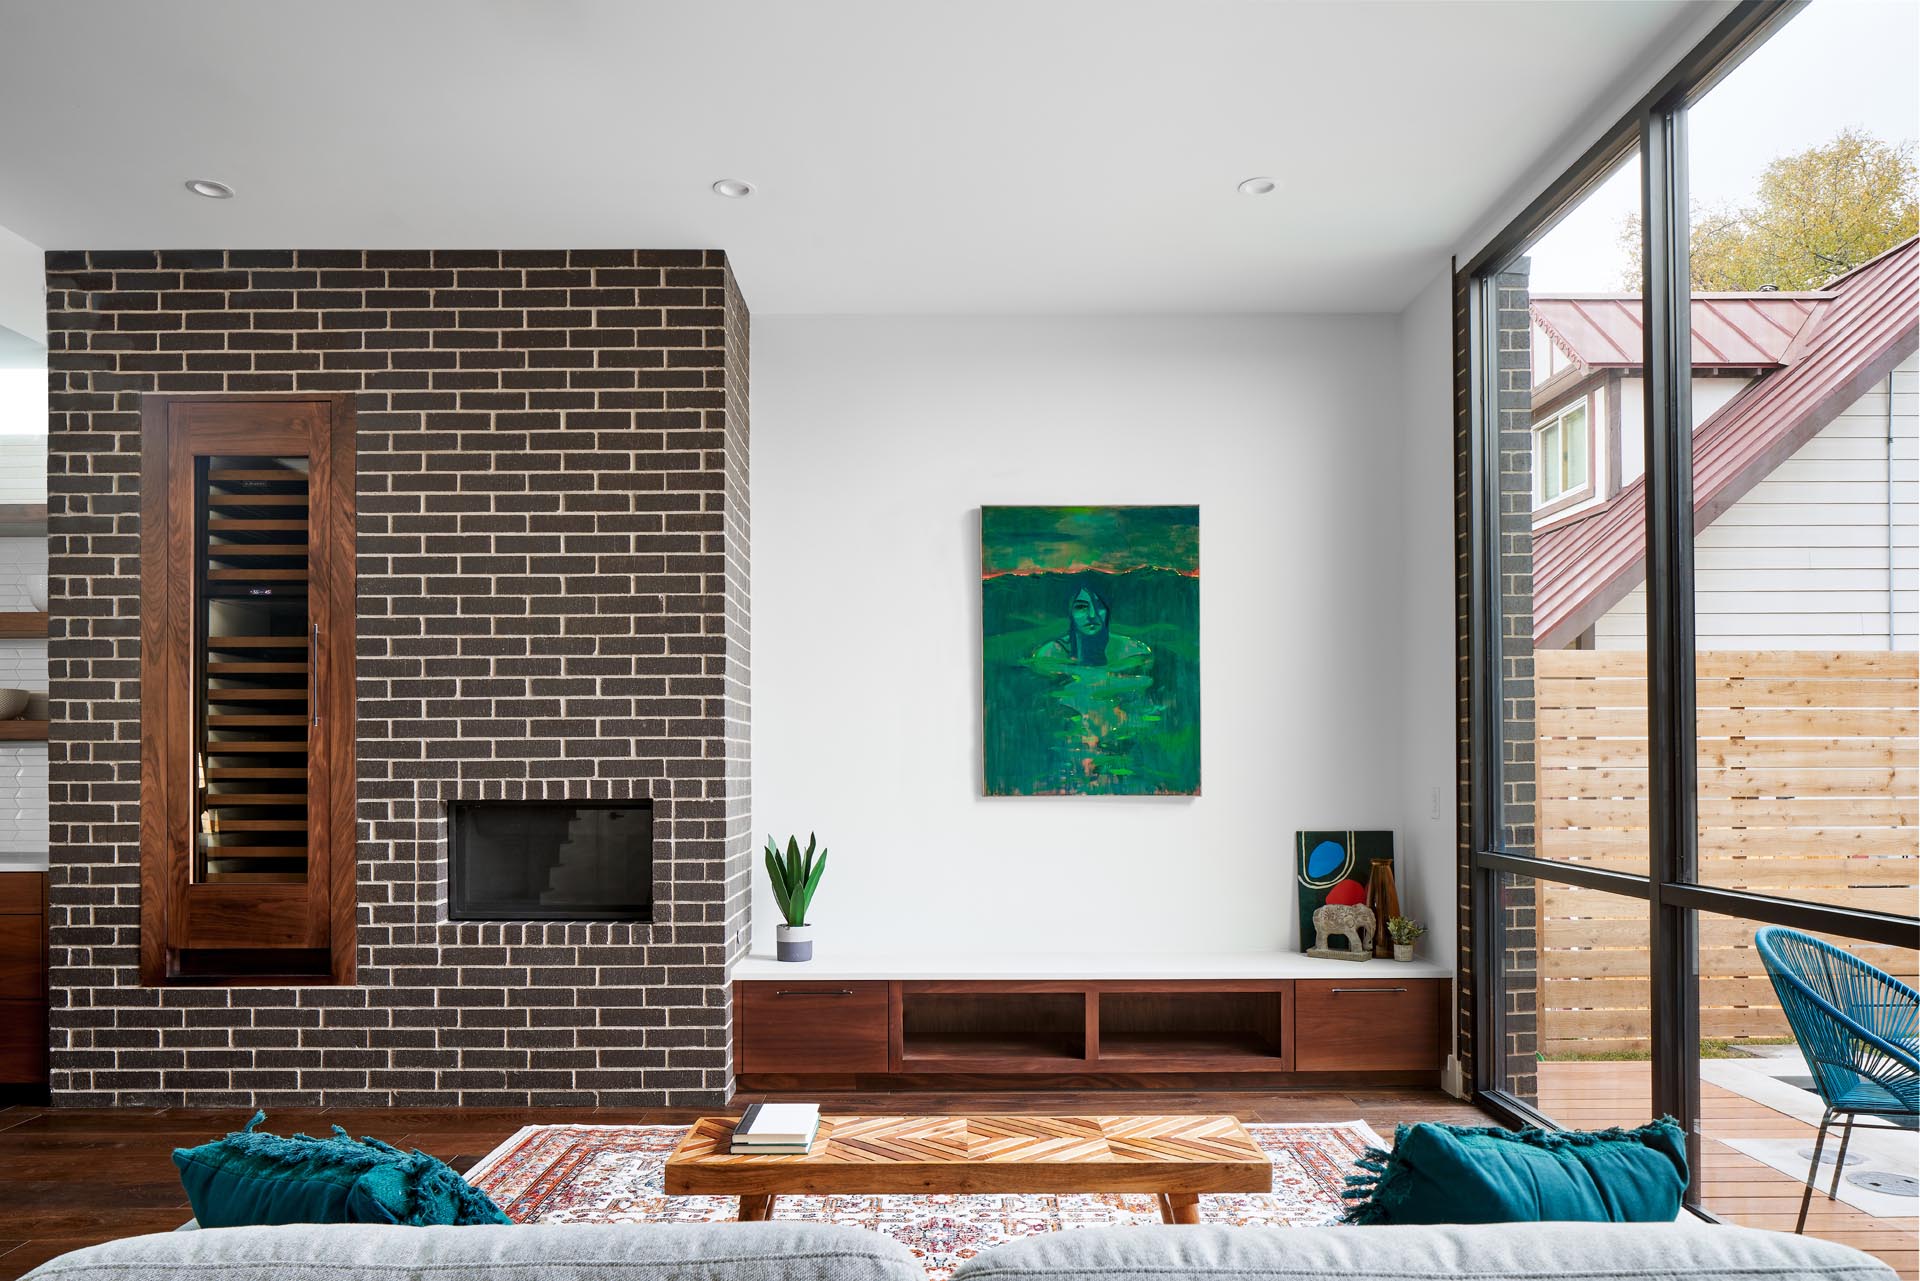 A modern living room with a brick accent, fireplace, and custom wood cabinetry.